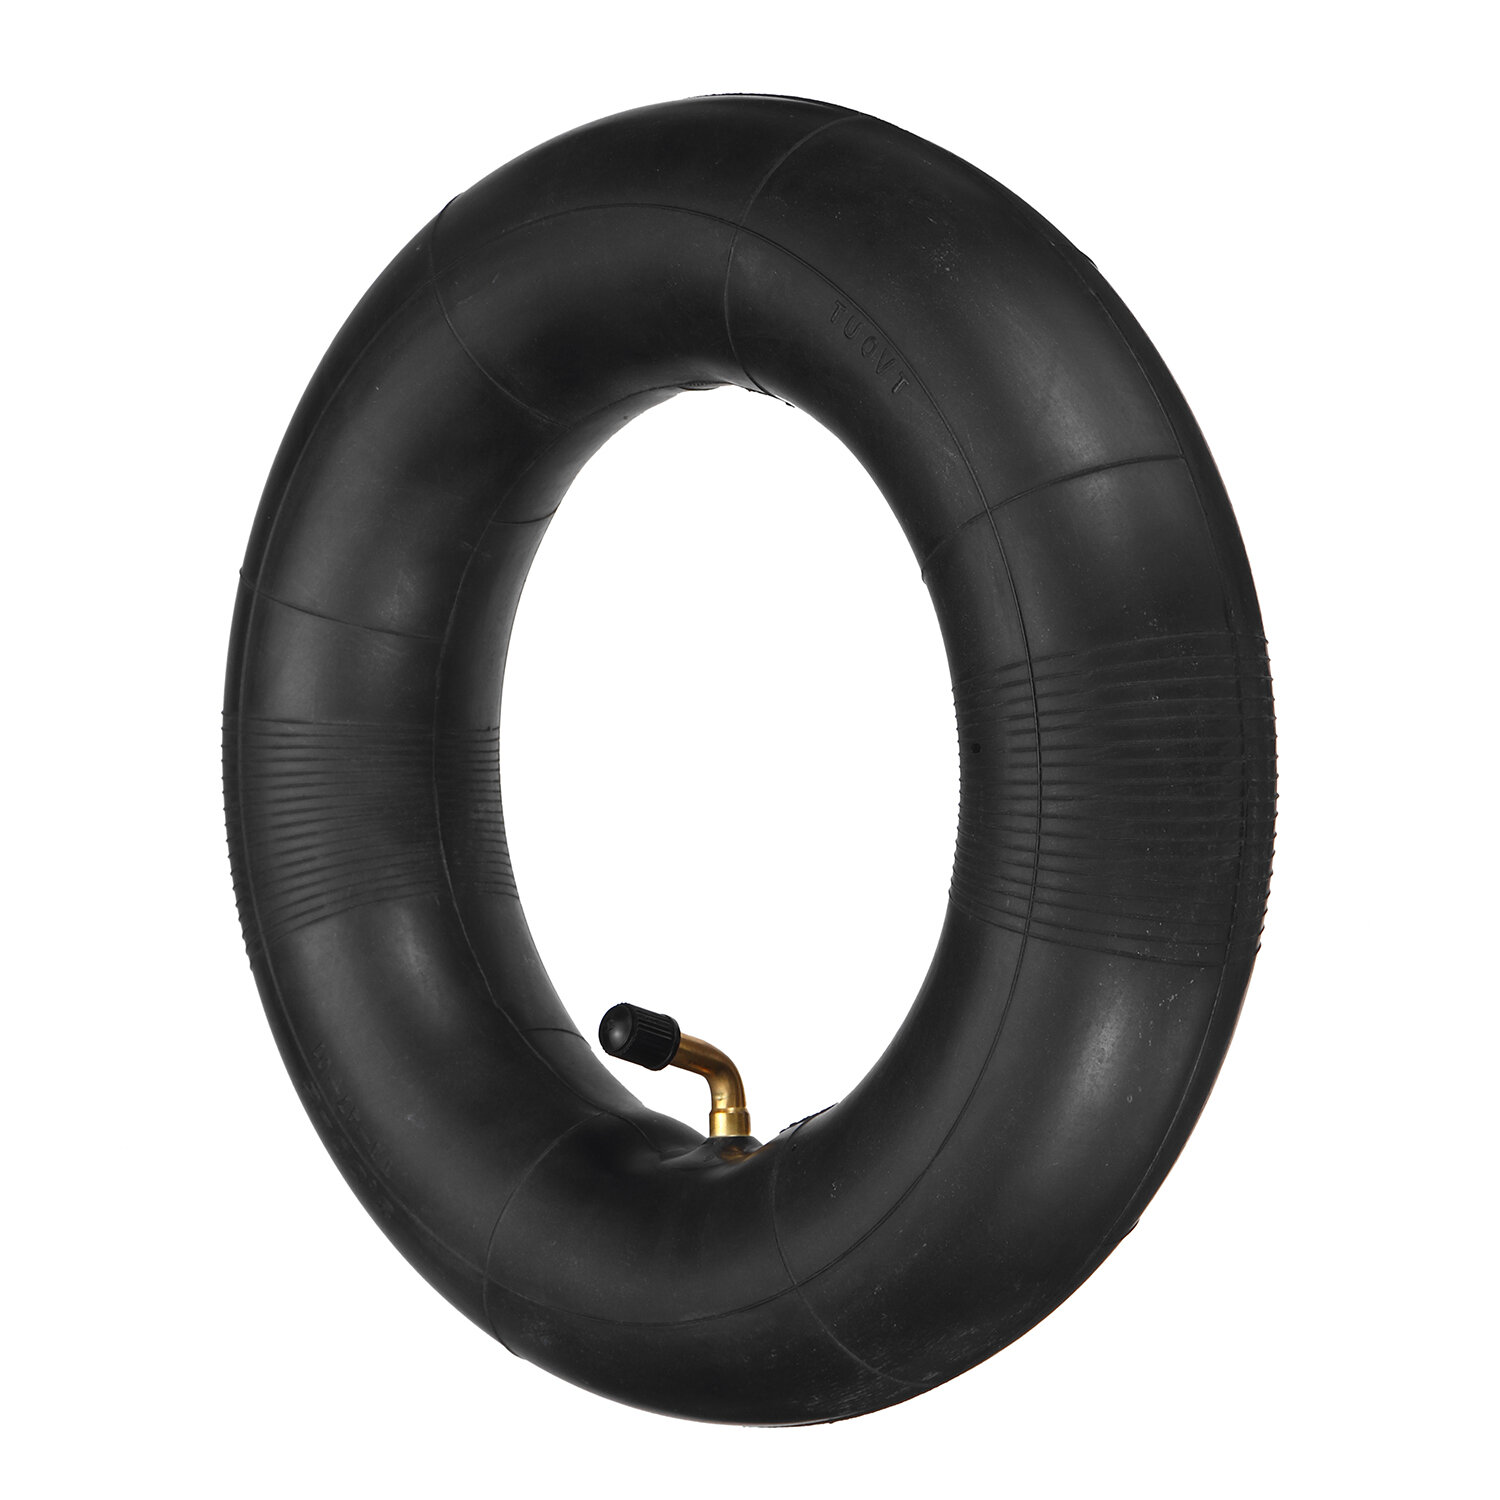 LAOTIE 10*3.0inch Inner Tube Electric Scooter Tires Wide Wheel Extra Wide And Thick for LAOTIE ES19 Electric Scooter COD